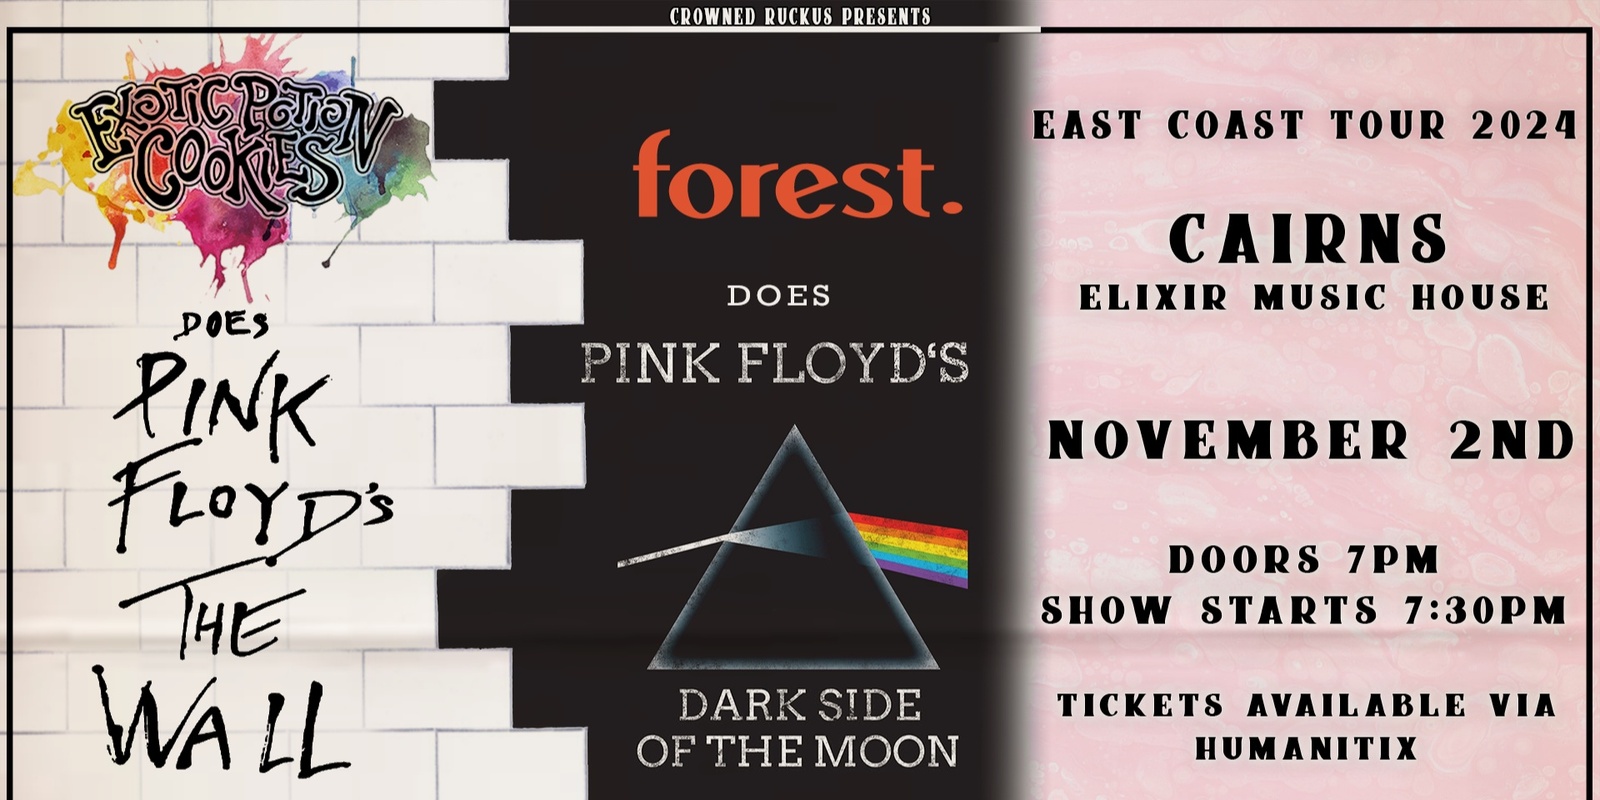 Banner image for C.R Presents: Exotic Potion Cookies does Pink Floyd's The Wall alongside Forest with Dark Side of the Moon - Cairns